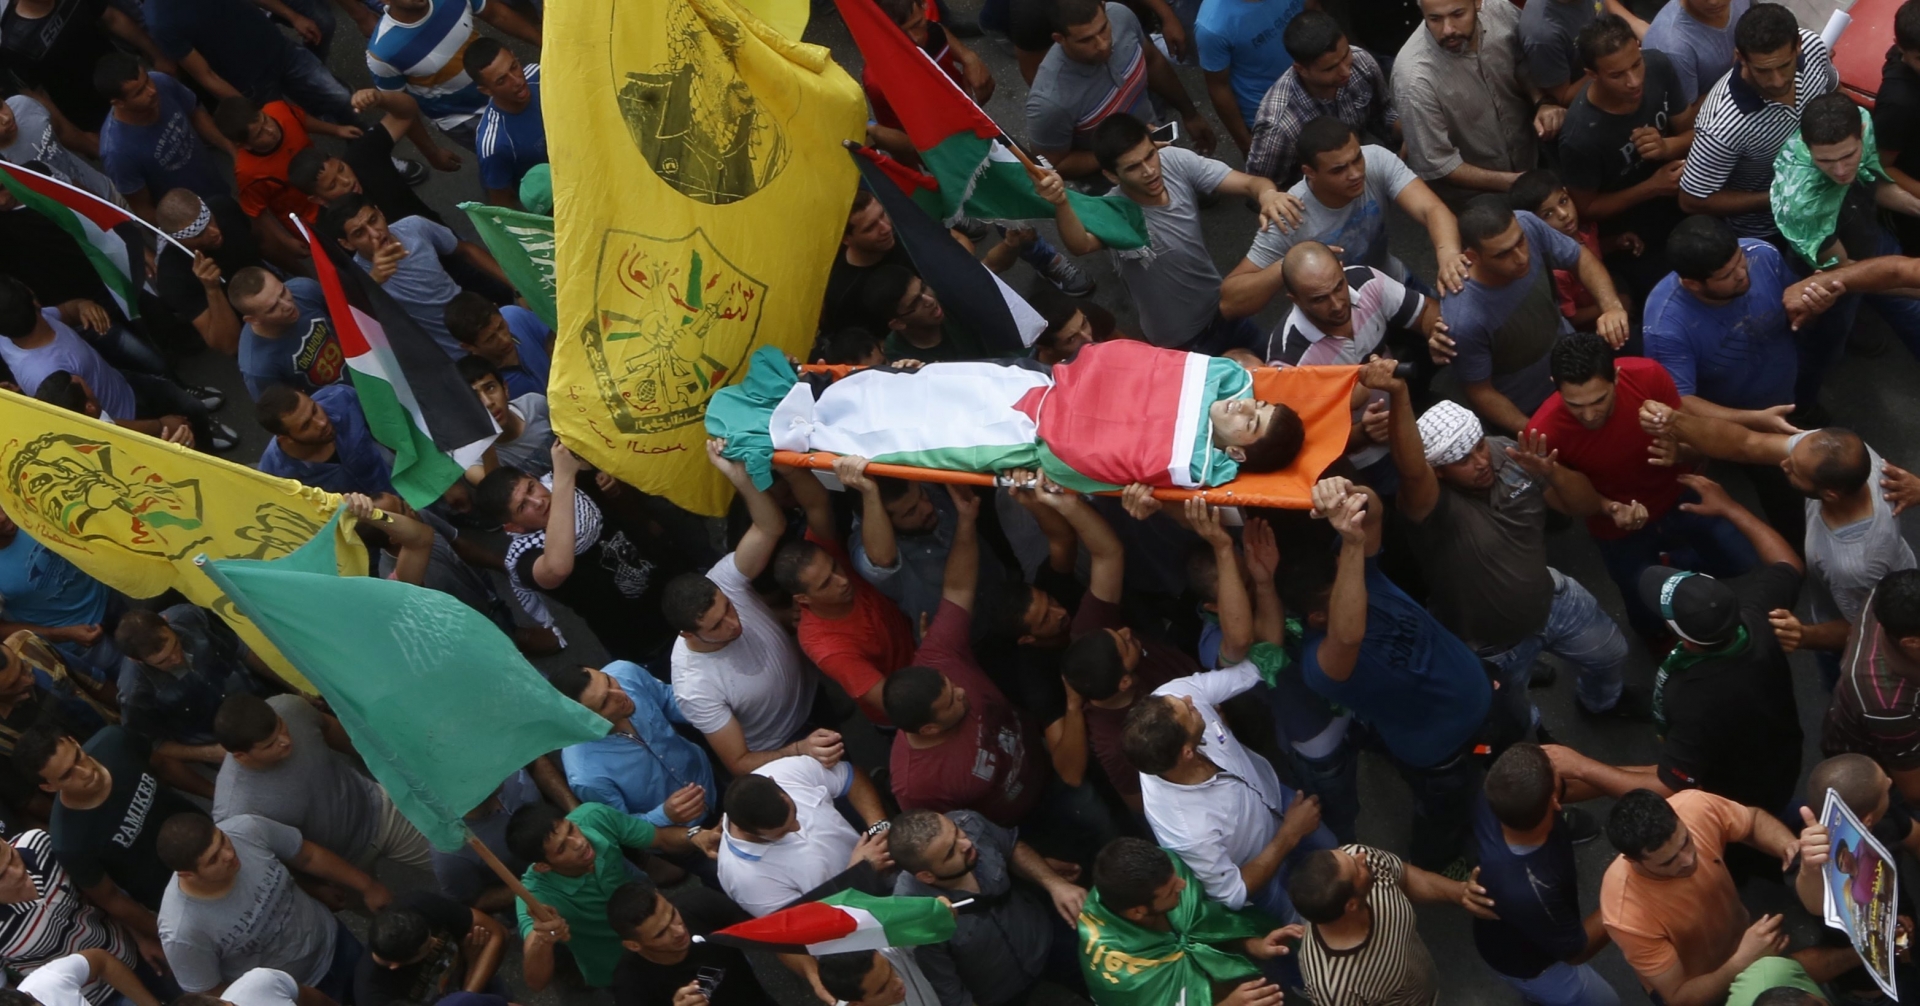 epa04964318 Palestinians carry body of 18-year-old Palestinian youth Huthayfa Othman during his funeral in the West Bank village of Bala, near Tulkarem, 05 October 2015. Israeli forces shot dead the Palestinian teenager during clashes in the northern West Bank village of Bala overnight 04 October, medics said. Reportedly threeother young men were also shot during the clashes.  EPA/ALAA BADARNEH